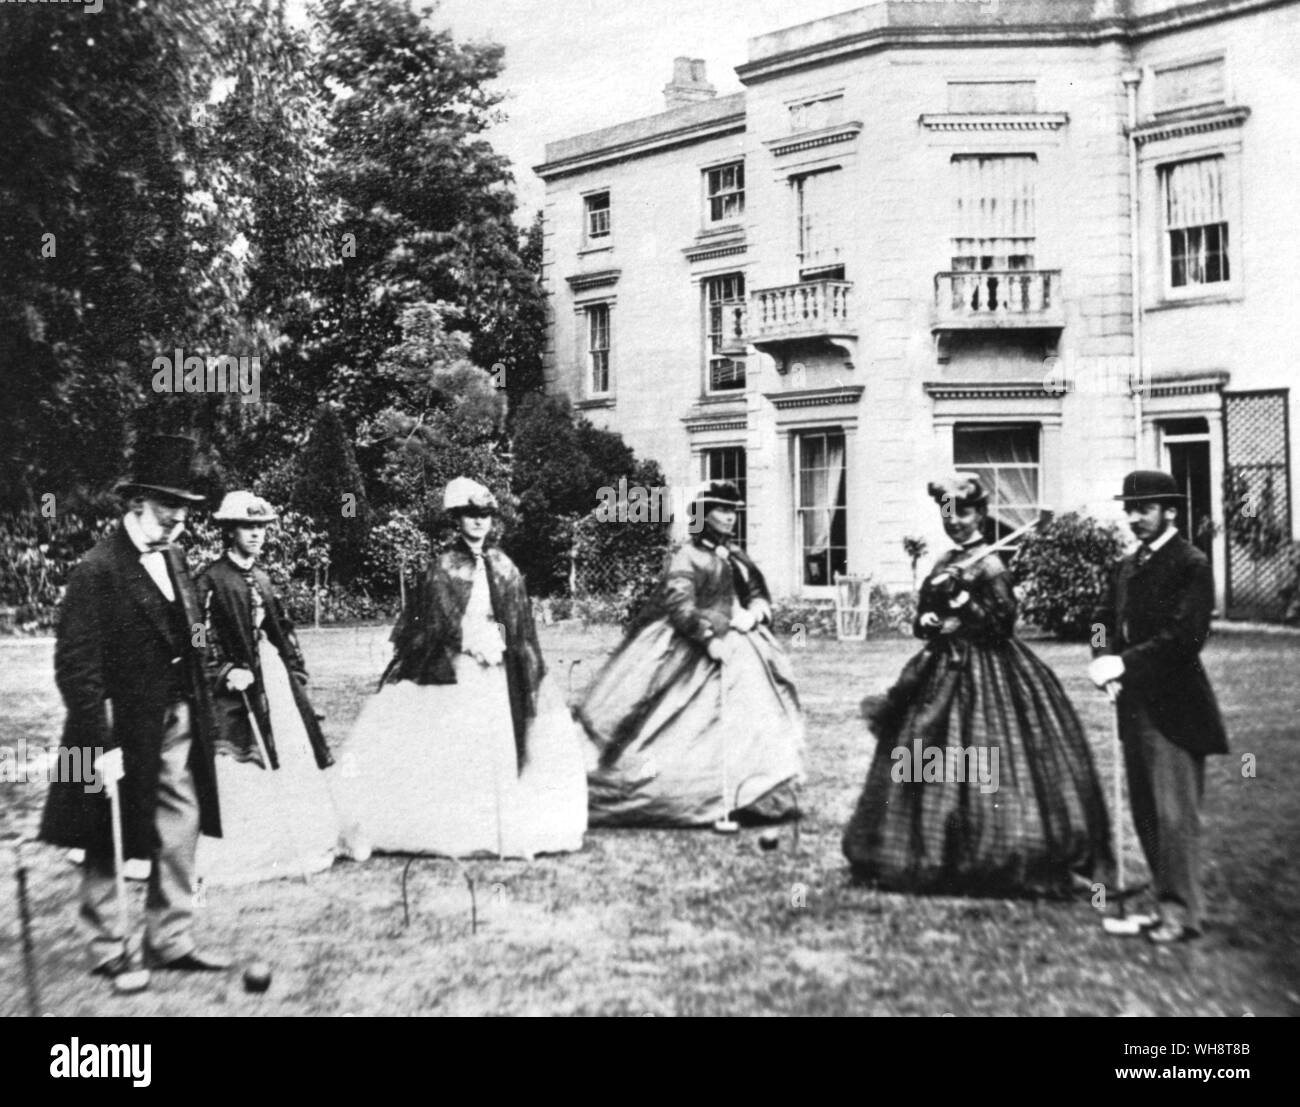 Croquet Party at Rev H Lee's photo by W Savage 1860s Stock Photo